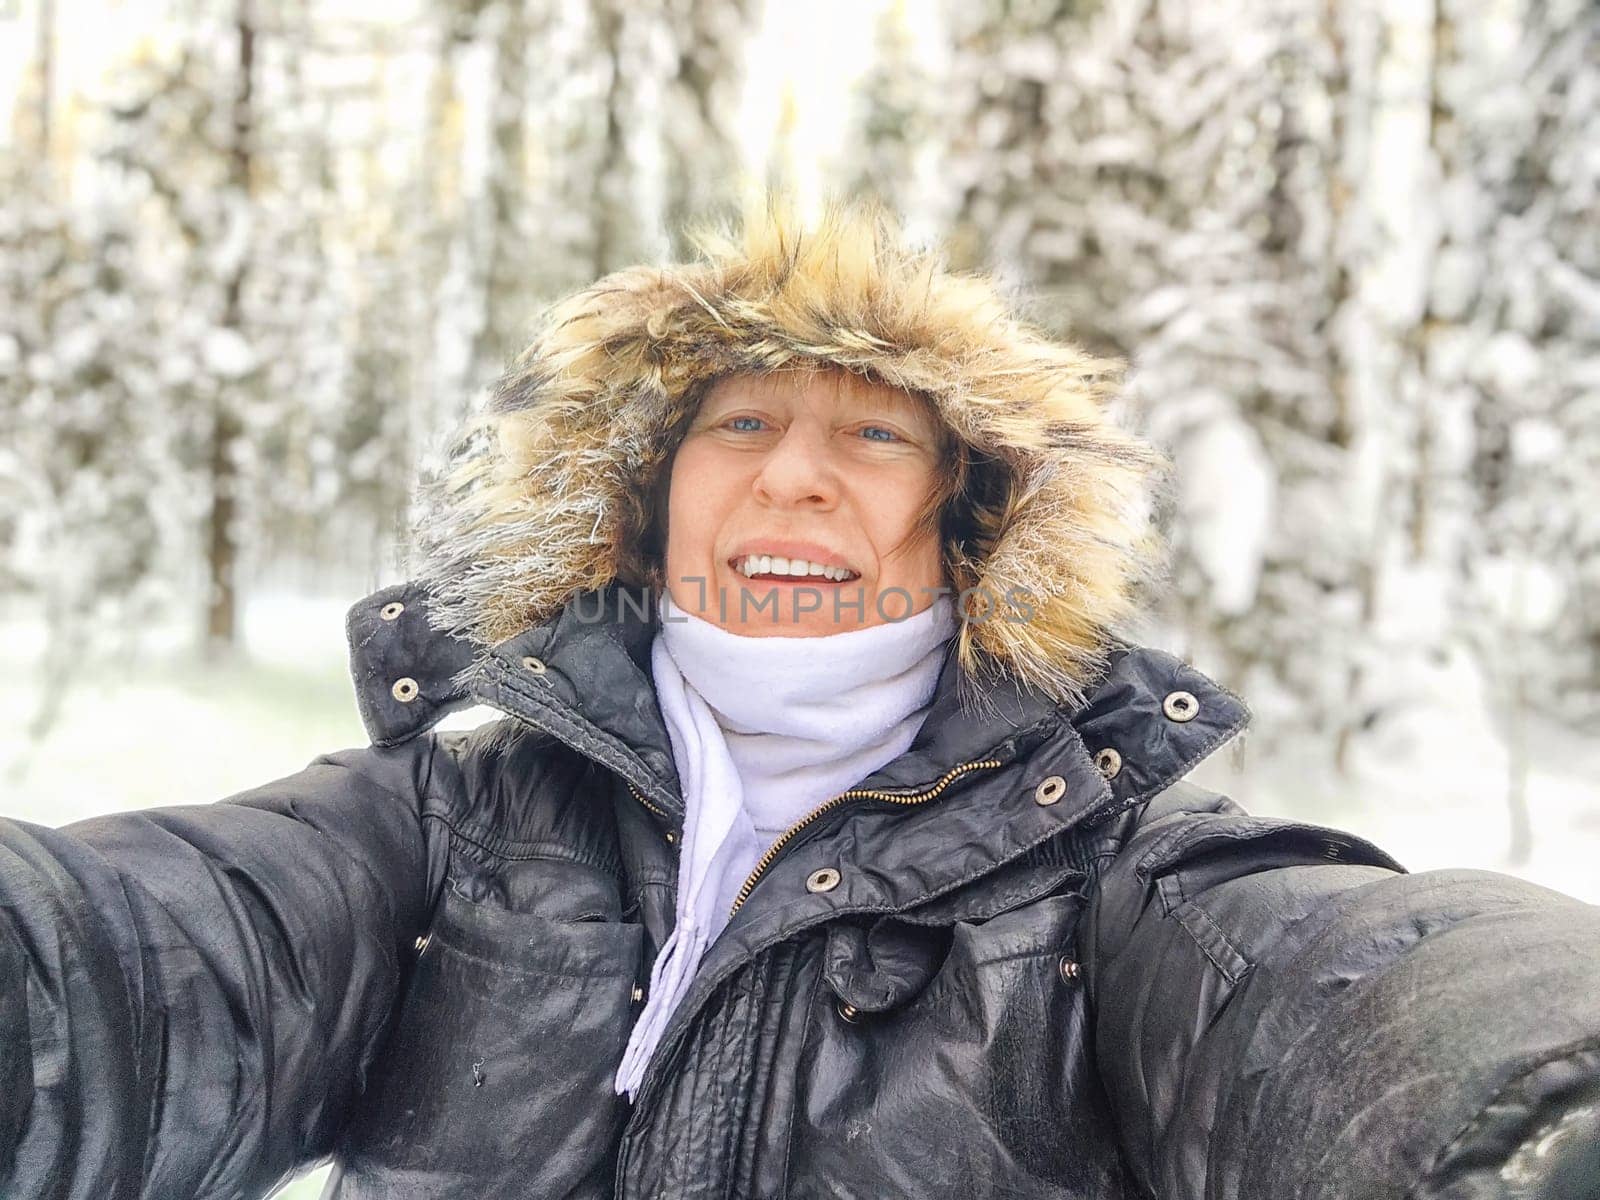 A cheerful middle aged woman in a winter coat with fur, scarf taking selfie on nature outdoors and cold, snowy background with blue sky and white clouds